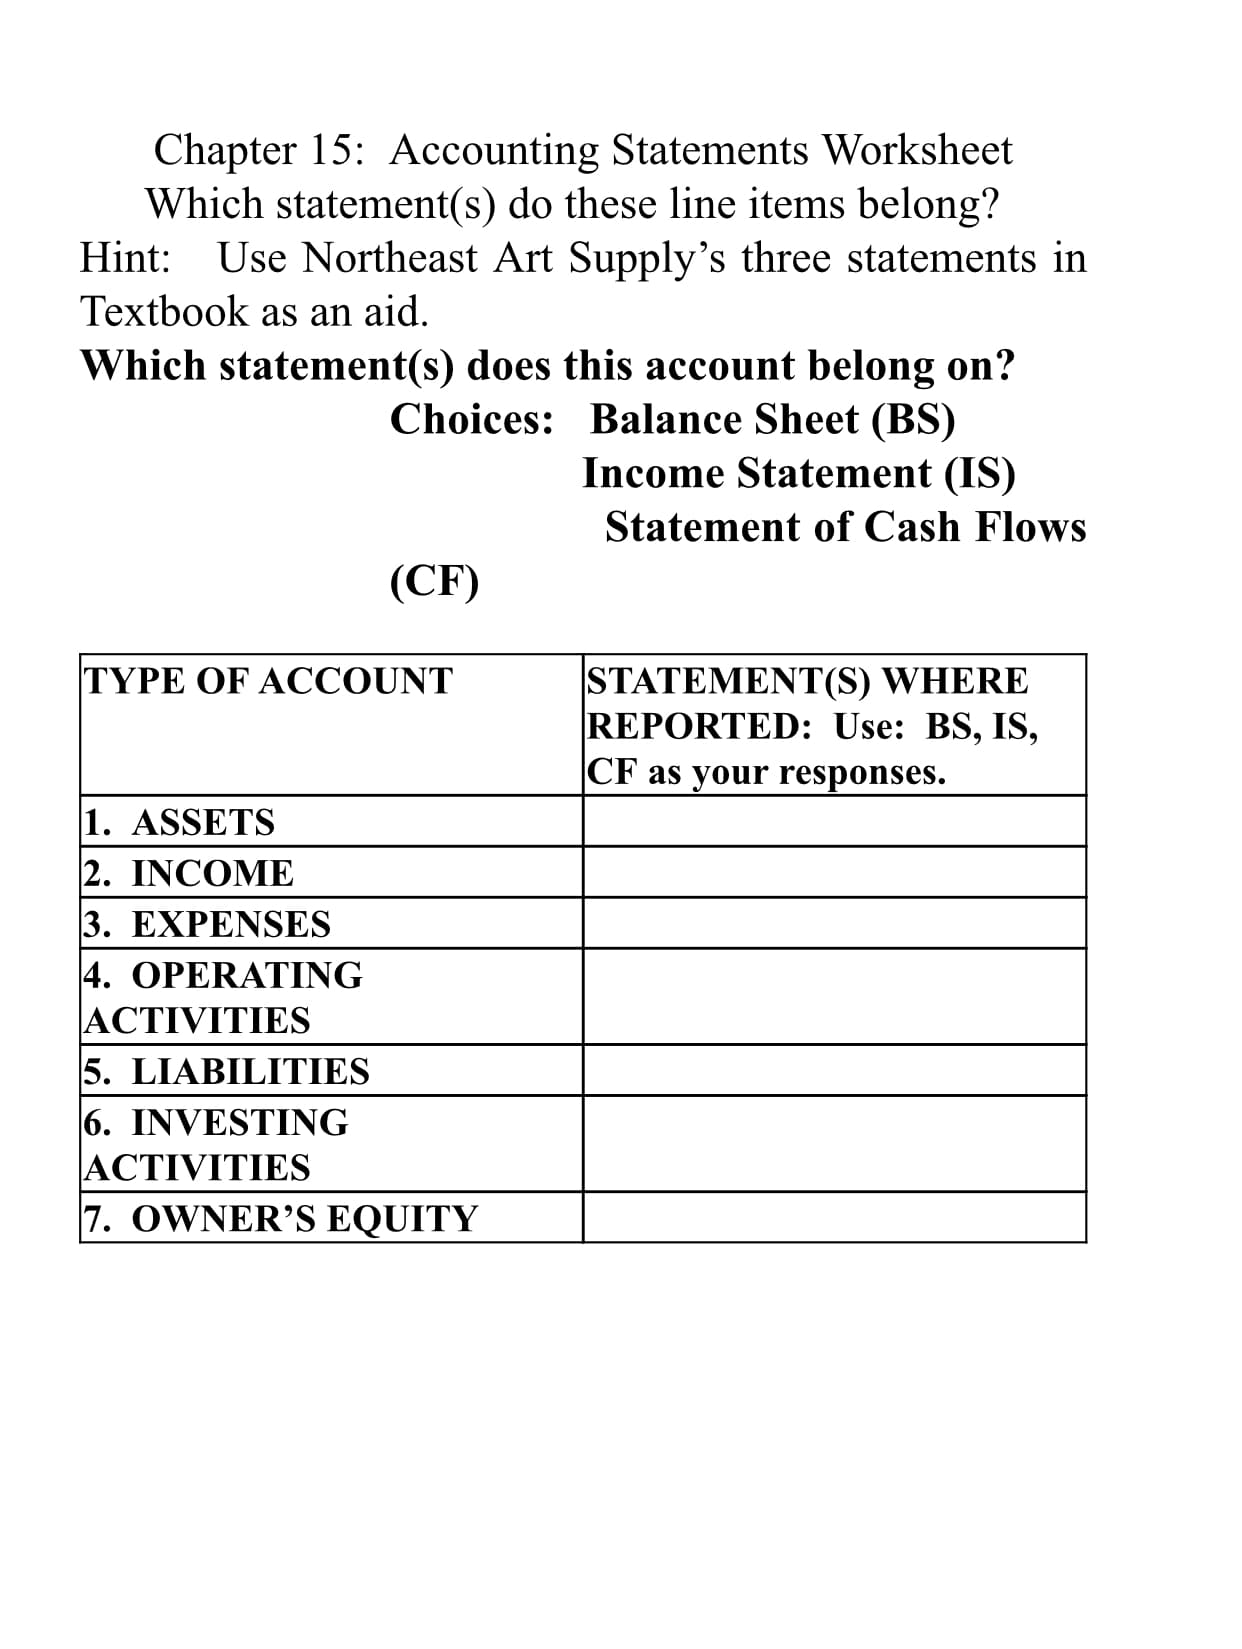 Chapter 15: Accounting Statements Worksheet
Which statement(s) do these line items belong?
Hint: Use Northeast Art Supply's three statements in
Textbook as an aid.
Which statement(s) does this account belong on?
Choices: Balance Sheet (BS)
Income Statement (IS)
Statement of Cash Flows
(CF)
STATEMENT(S) WHERE
REPORTED: Use: BS, IS,
|CF as your responses.
TYPE OF ACCOUNT
1. ASSETS
2. INCOME
3. EXPENSES
4. OPERATING
ACTIVITIES
5. LIABILITIES
6. INVESTING
ACTIVITIES
7. OWNER'S EQUITY
